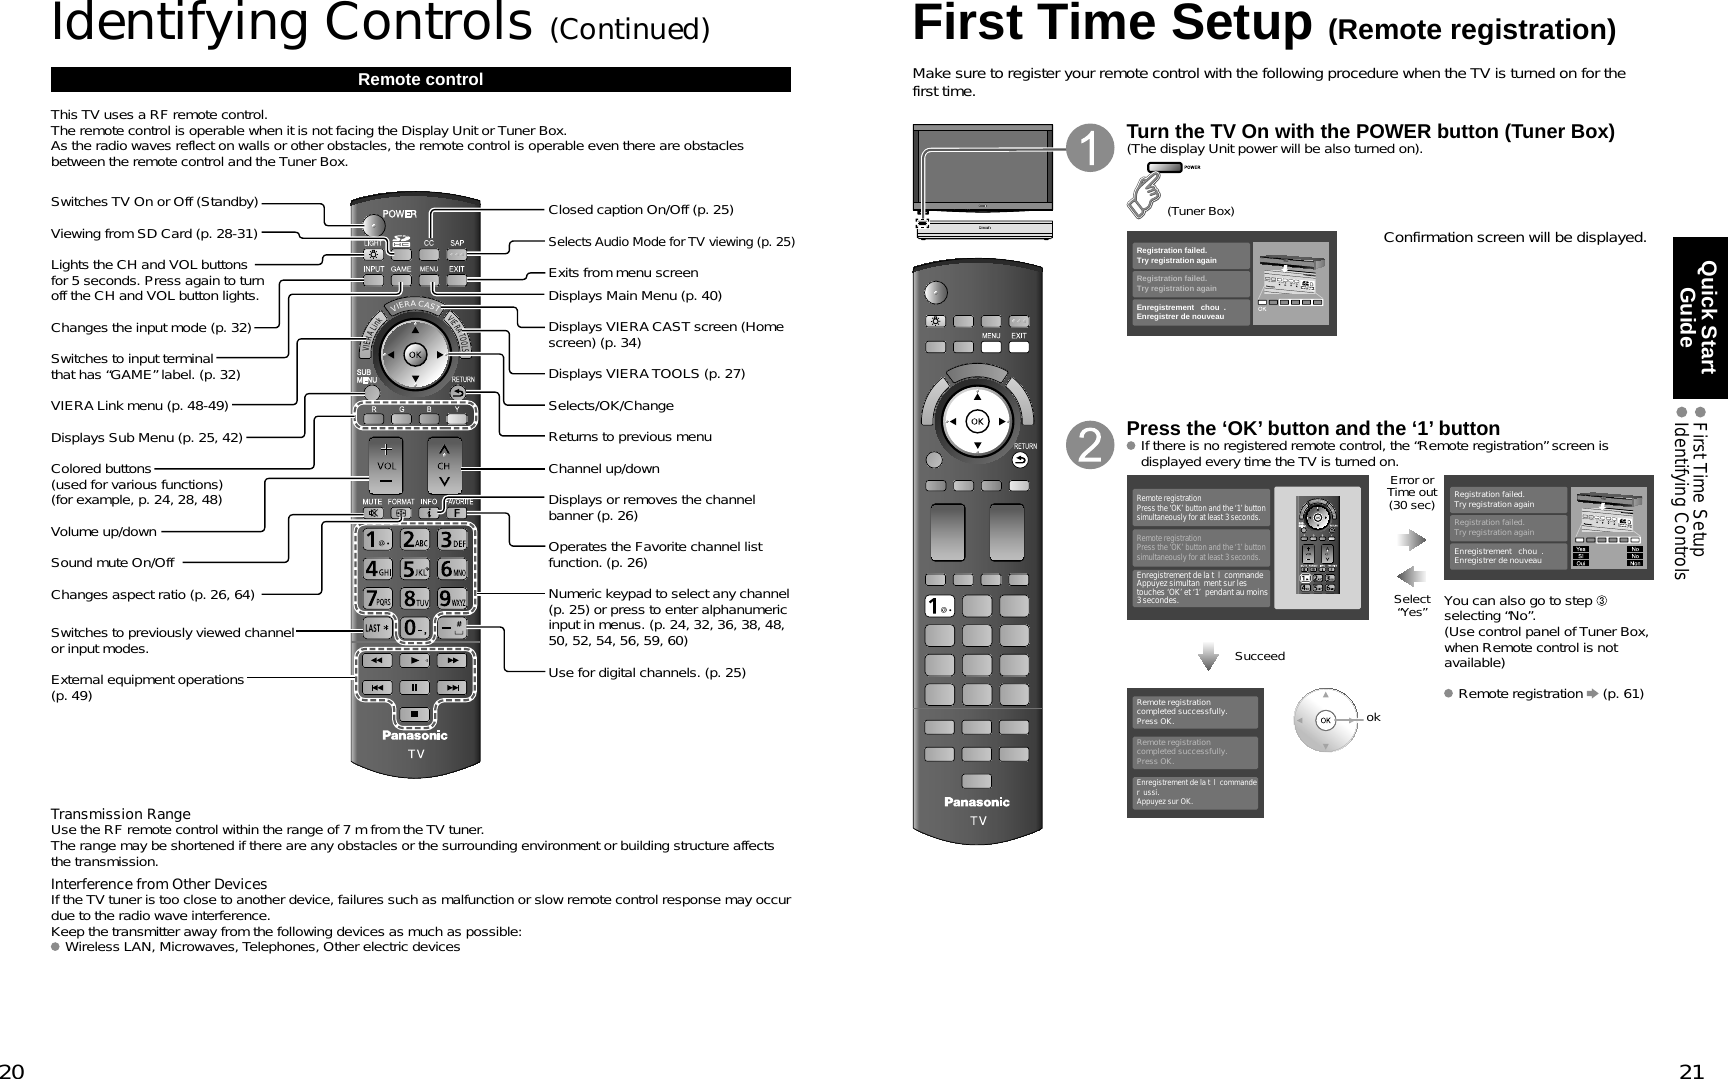 20 21Quick Start Guide  First Time Setup Identifying ControlsVIERACASTVIERATOOLSVIERALinkRemote controlSwitches TV On or Off (Standby)Viewing from SD Card (p. 28-31)Lights the CH and VOL buttons for 5 seconds. Press again to turn off the CH and VOL button lights.Changes the input mode (p. 32)Switches to input terminal that has “GAME” label. (p. 32)VIERA Link menu (p. 48-49)Displays Sub Menu (p. 25, 42)Colored buttons (used for various functions)(for example, p. 24, 28, 48)Volume up/downSound mute On/OffChanges aspect ratio (p. 26, 64)Switches to previously viewed channel or input modes.External equipment operations (p. 49)Closed caption On/Off (p. 25)Selects Audio Mode for TV viewing (p. 25)Exits from menu screenDisplays Main Menu (p. 40)Displays VIERA CAST screen (Home screen) (p. 34)Displays VIERA TOOLS (p. 27)Selects/OK/ChangeReturns to previous menuChannel up/downDisplays or removes the channel banner (p. 26)Operates the Favorite channel list function. (p. 26)Numeric keypad to select any channel (p. 25) or press to enter alphanumeric input in menus. (p. 24, 32, 36, 38, 48, 50, 52, 54, 56, 59, 60)Use for digital channels. (p. 25)First Time Setup (Remote registration)Make sure to register your remote control with the following procedure when the TV is turned on for the first time.Turn the TV On with the POWER button (Tuner Box)(The display Unit power will be also turned on).(Tuner Box)Registration failed.Try registration againEnregistrement chou .Enregistrer de nouveau Registration failed.Try registration againCHVOLINPUT/OKMENUConfirmation screen will be displayed.Press the ‘OK’ button and the ‘1’ button If there is no registered remote control, the “Remote registration” screen is displayed every time the TV is turned on.VIERACASTVIERATOOLSVIERALinkRemote registrationPress the ‘OK’ button and the ‘1’ button simultaneously for at least 3 seconds.Remote registrationPress the ‘OK’ button and the ‘1’ button simultaneously for at least 3 seconds.Enregistrement de la t l commandeAppuyez simultan ment sur les touches ‘OK’ et ‘1’  pendant au moins 3 secondes.Error orTime out(30 sec)Registration failed.Try registration againEnregistrement chou .Enregistrer de nouveau Registration failed.Try registration againCHVOLINPUT/OKMENUSelect“Yes” You can also go to step selecting “No”. (Use control panel of Tuner Box, when Remote control is not available)SucceedRemote registration completed successfully.Press OK.Remote registration completed successfully.Press OK.Enregistrement de la t l commande r ussi.Appuyez sur OK.ok Remote registration   (p. 61)Identifying Controls (Continued)This TV uses a RF remote control. The remote control is operable when it is not facing the Display Unit or Tuner Box.As the radio waves reflect on walls or other obstacles, the remote control is operable even there are obstacles between the remote control and the Tuner Box.Transmission RangeUse the RF remote control within the range of 7 m from the TV tuner.The range may be shortened if there are any obstacles or the surrounding environment or building structure affects the transmission.Interference from Other DevicesIf the TV tuner is too close to another device, failures such as malfunction or slow remote control response may occur due to the radio wave interference. Keep the transmitter away from the following devices as much as possible:  Wireless LAN, Microwaves, Telephones, Other electric devices